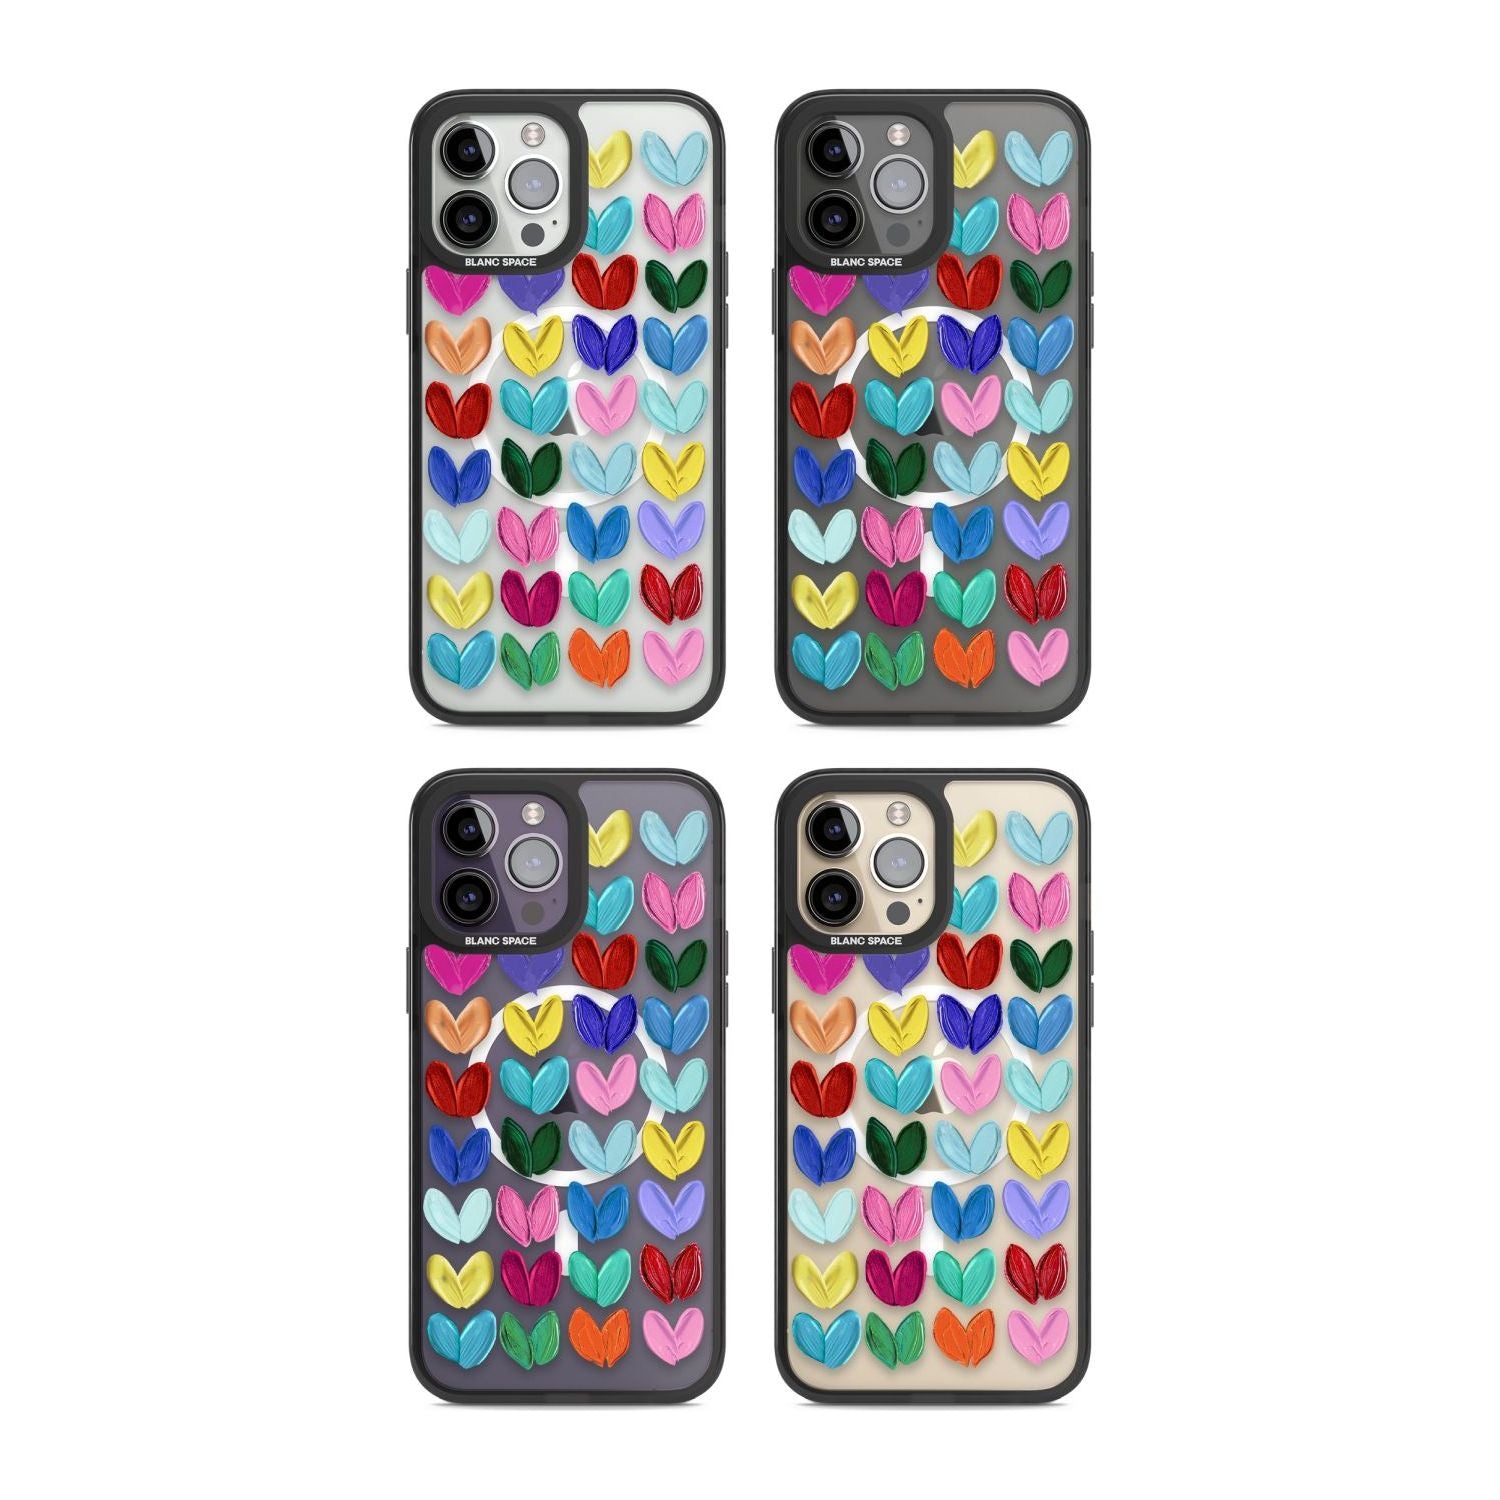 Oil Painted Hearts Phone Case iPhone 15 Pro Max / Black Impact Case,iPhone 15 Plus / Black Impact Case,iPhone 15 Pro / Black Impact Case,iPhone 15 / Black Impact Case,iPhone 15 Pro Max / Impact Case,iPhone 15 Plus / Impact Case,iPhone 15 Pro / Impact Case,iPhone 15 / Impact Case,iPhone 15 Pro Max / Magsafe Black Impact Case,iPhone 15 Plus / Magsafe Black Impact Case,iPhone 15 Pro / Magsafe Black Impact Case,iPhone 15 / Magsafe Black Impact Case,iPhone 14 Pro Max / Black Impact Case,iPhone 14 Plus / Black Im